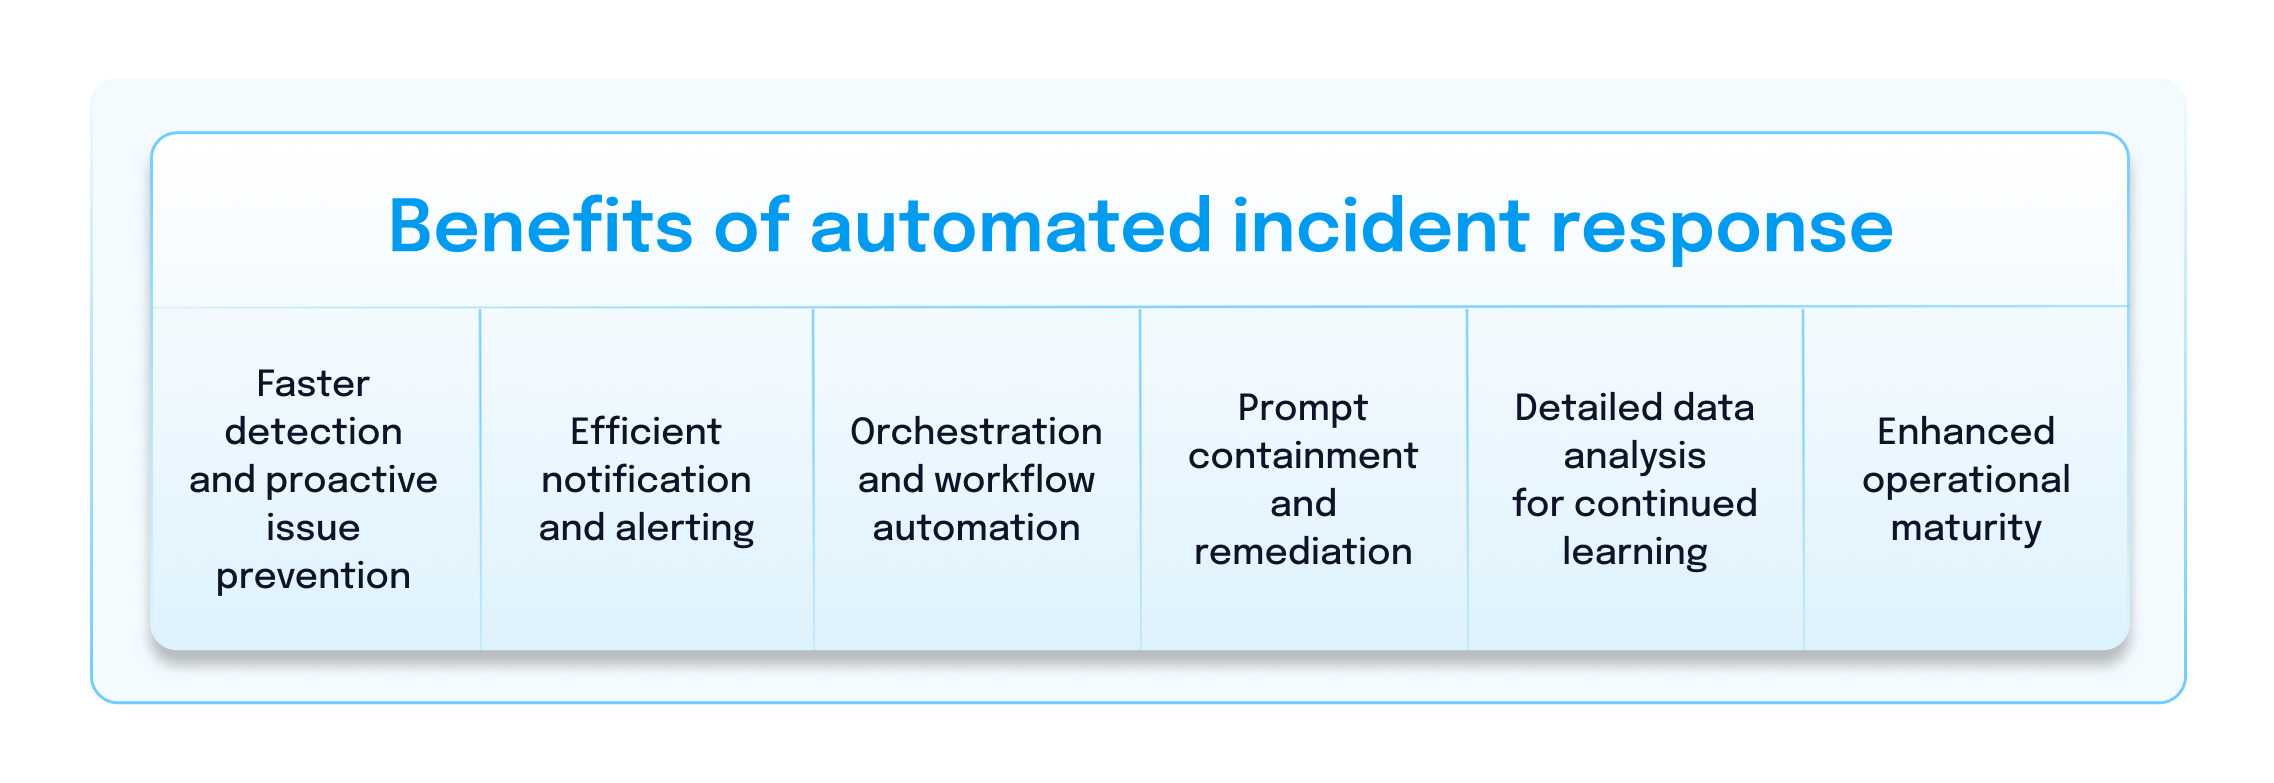 Benefits of automated incident response